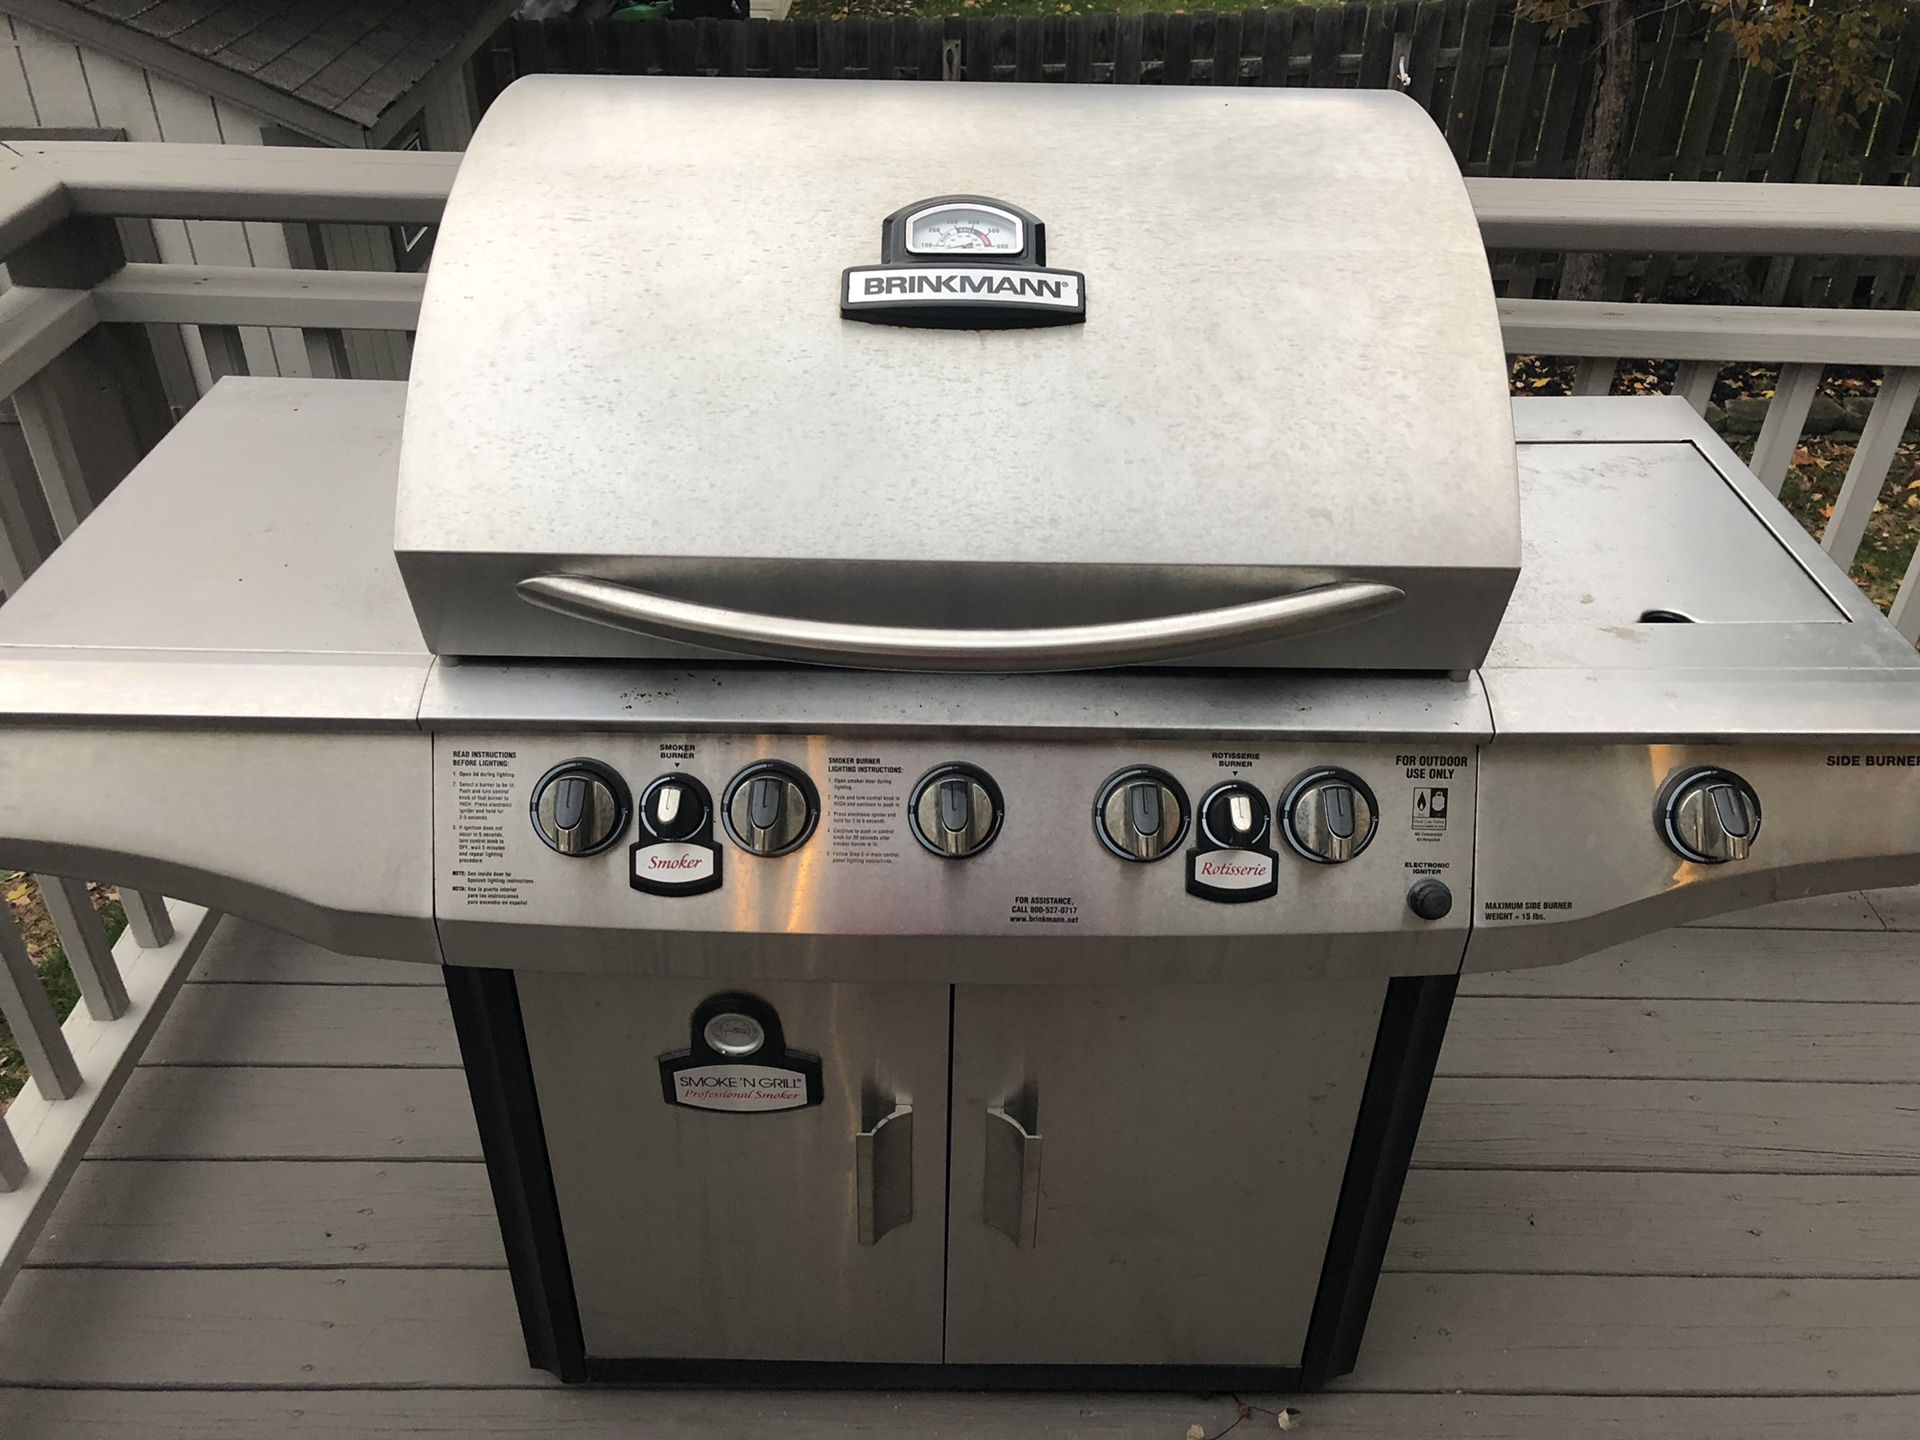 Brinkmann Smoke ‘n Grill 5-burner propane grille with built-in smoker and side burner (cover included)